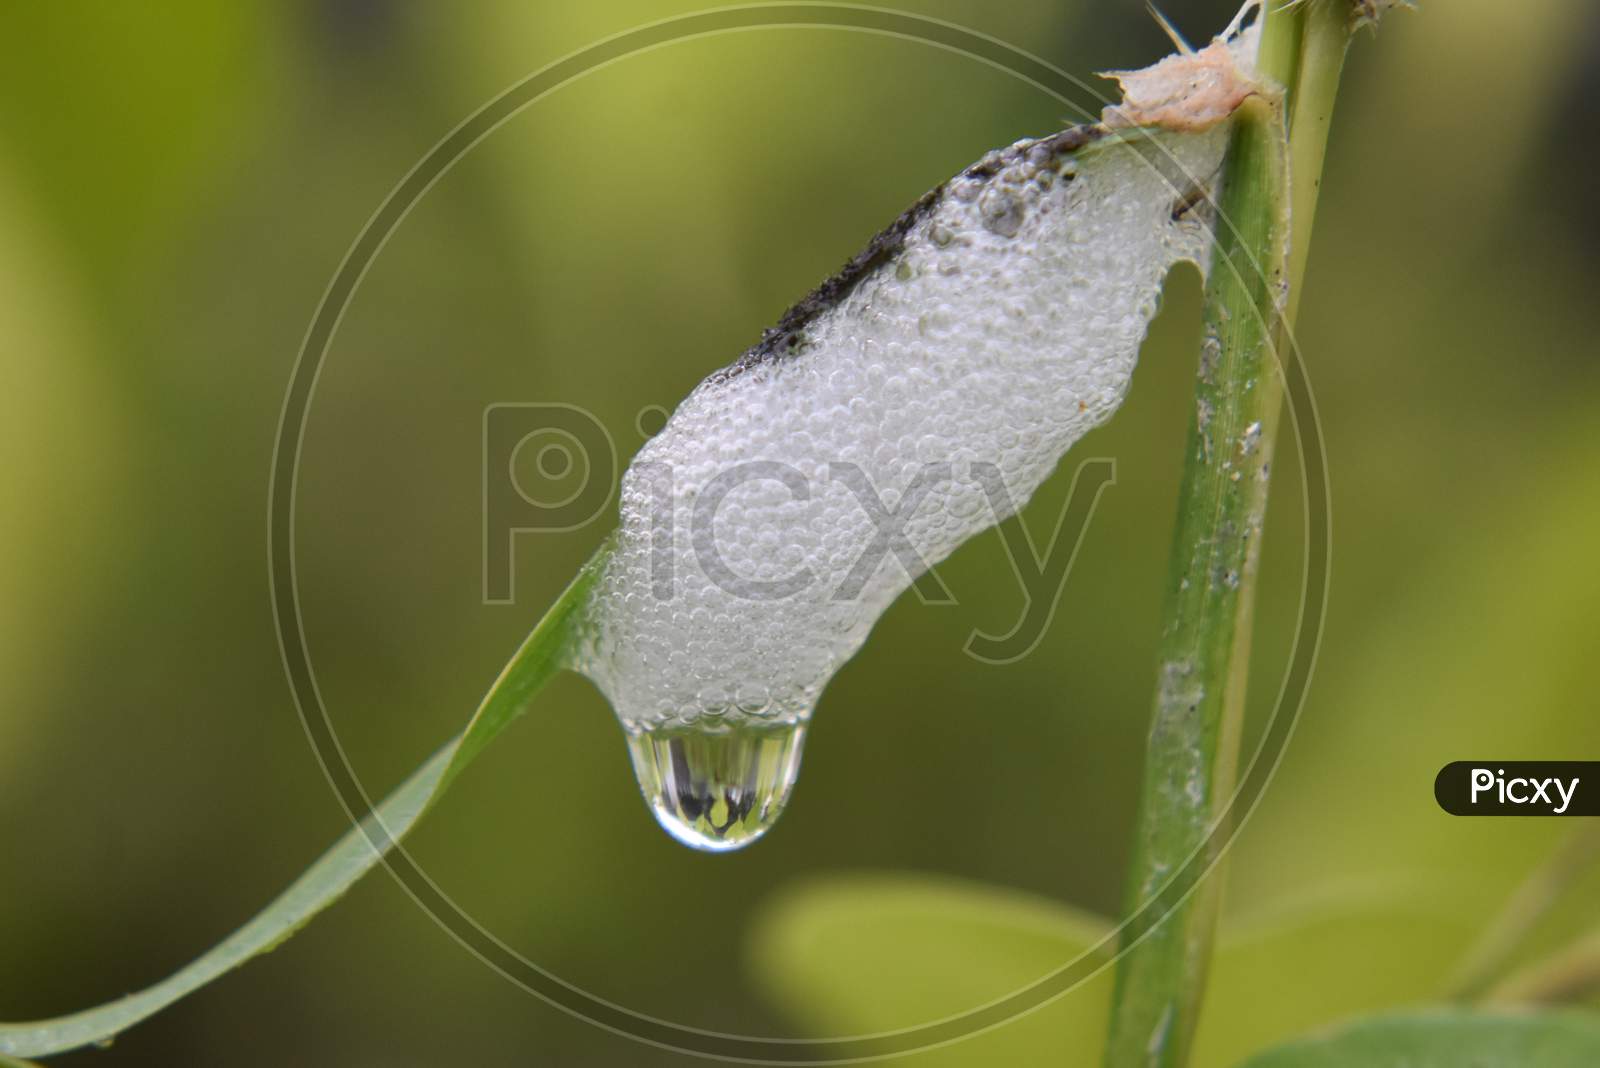 Nature's droplet